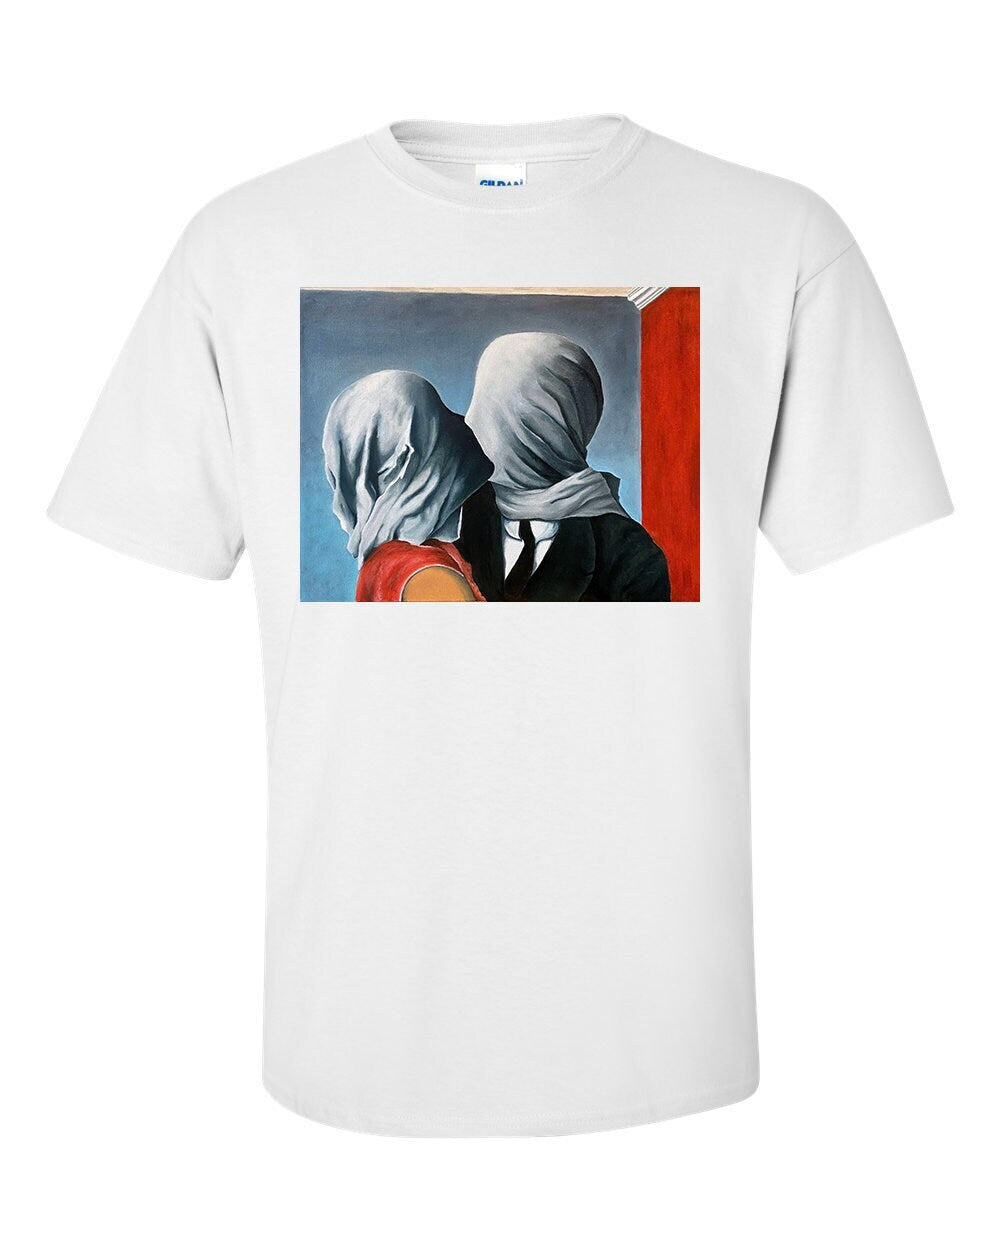 The Lovers, Les Amants, by Rene Magritte Fine Art T-Shirt